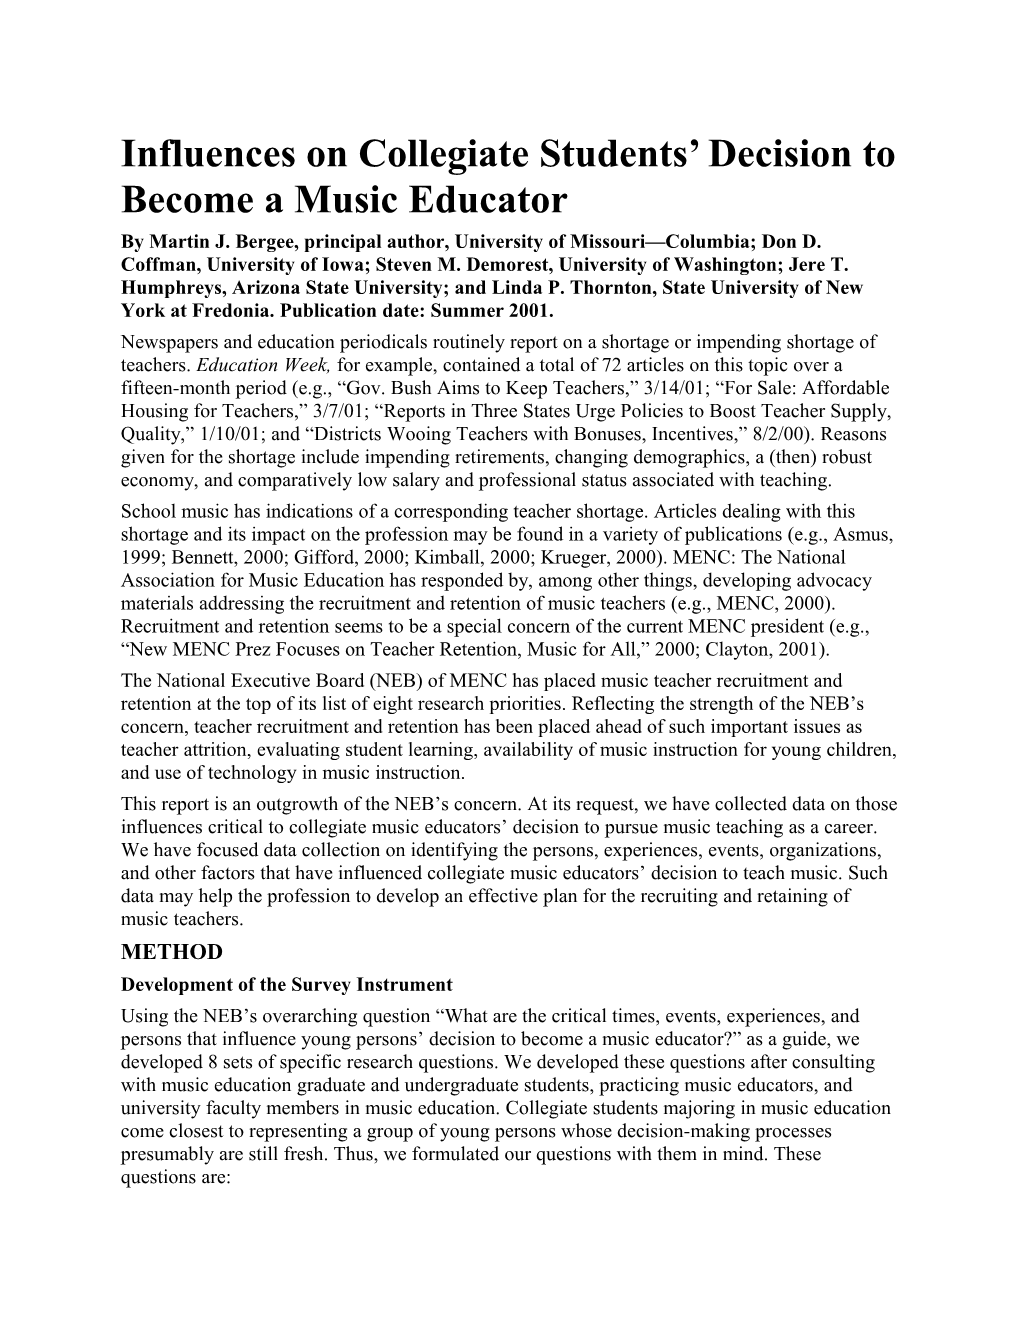 Influences on Collegiate Students Decision to Become a Music Educator